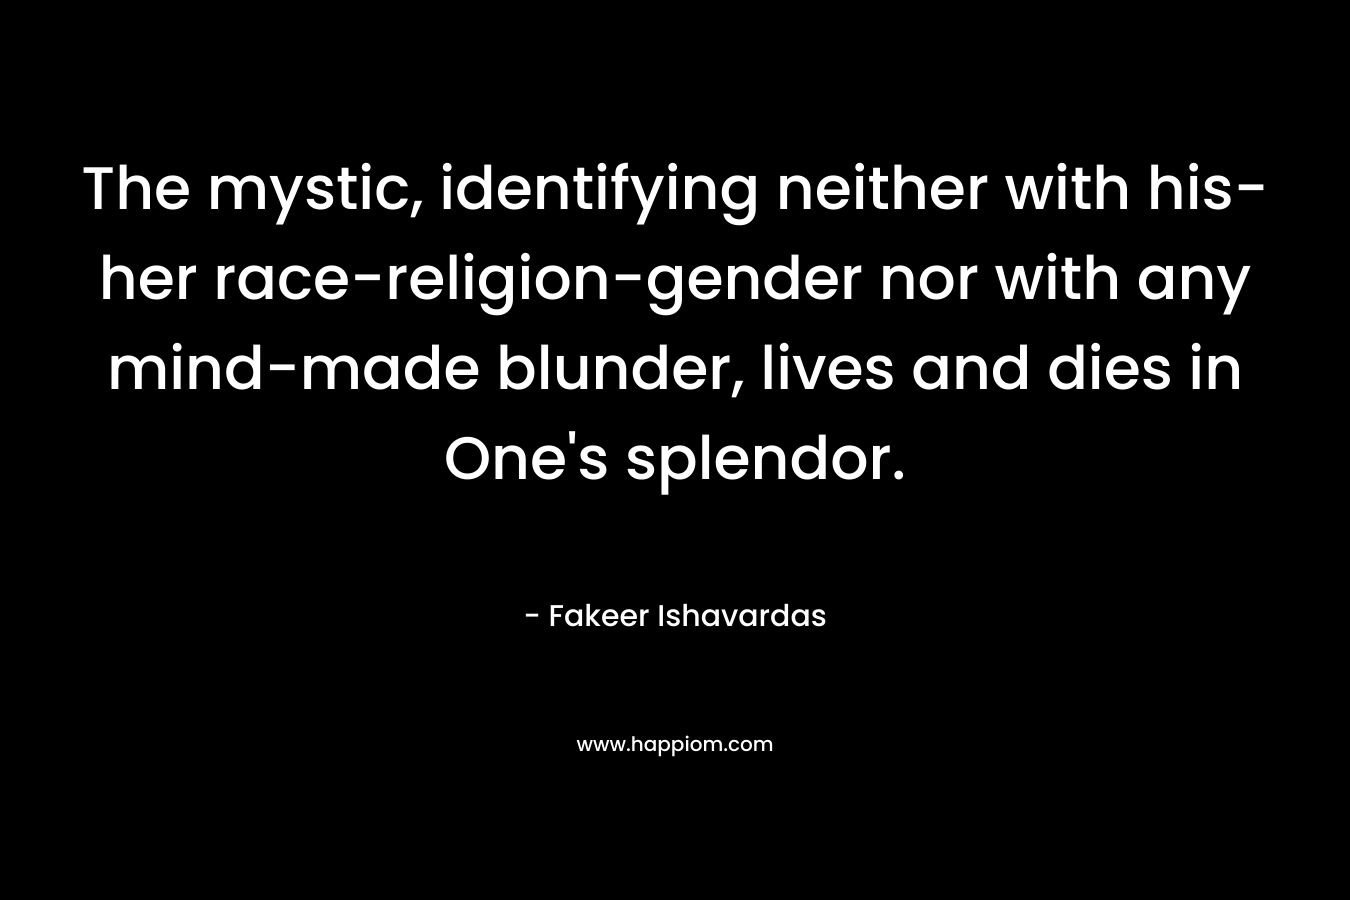 The mystic, identifying neither with his-her race-religion-gender nor with any mind-made blunder, lives and dies in One's splendor.